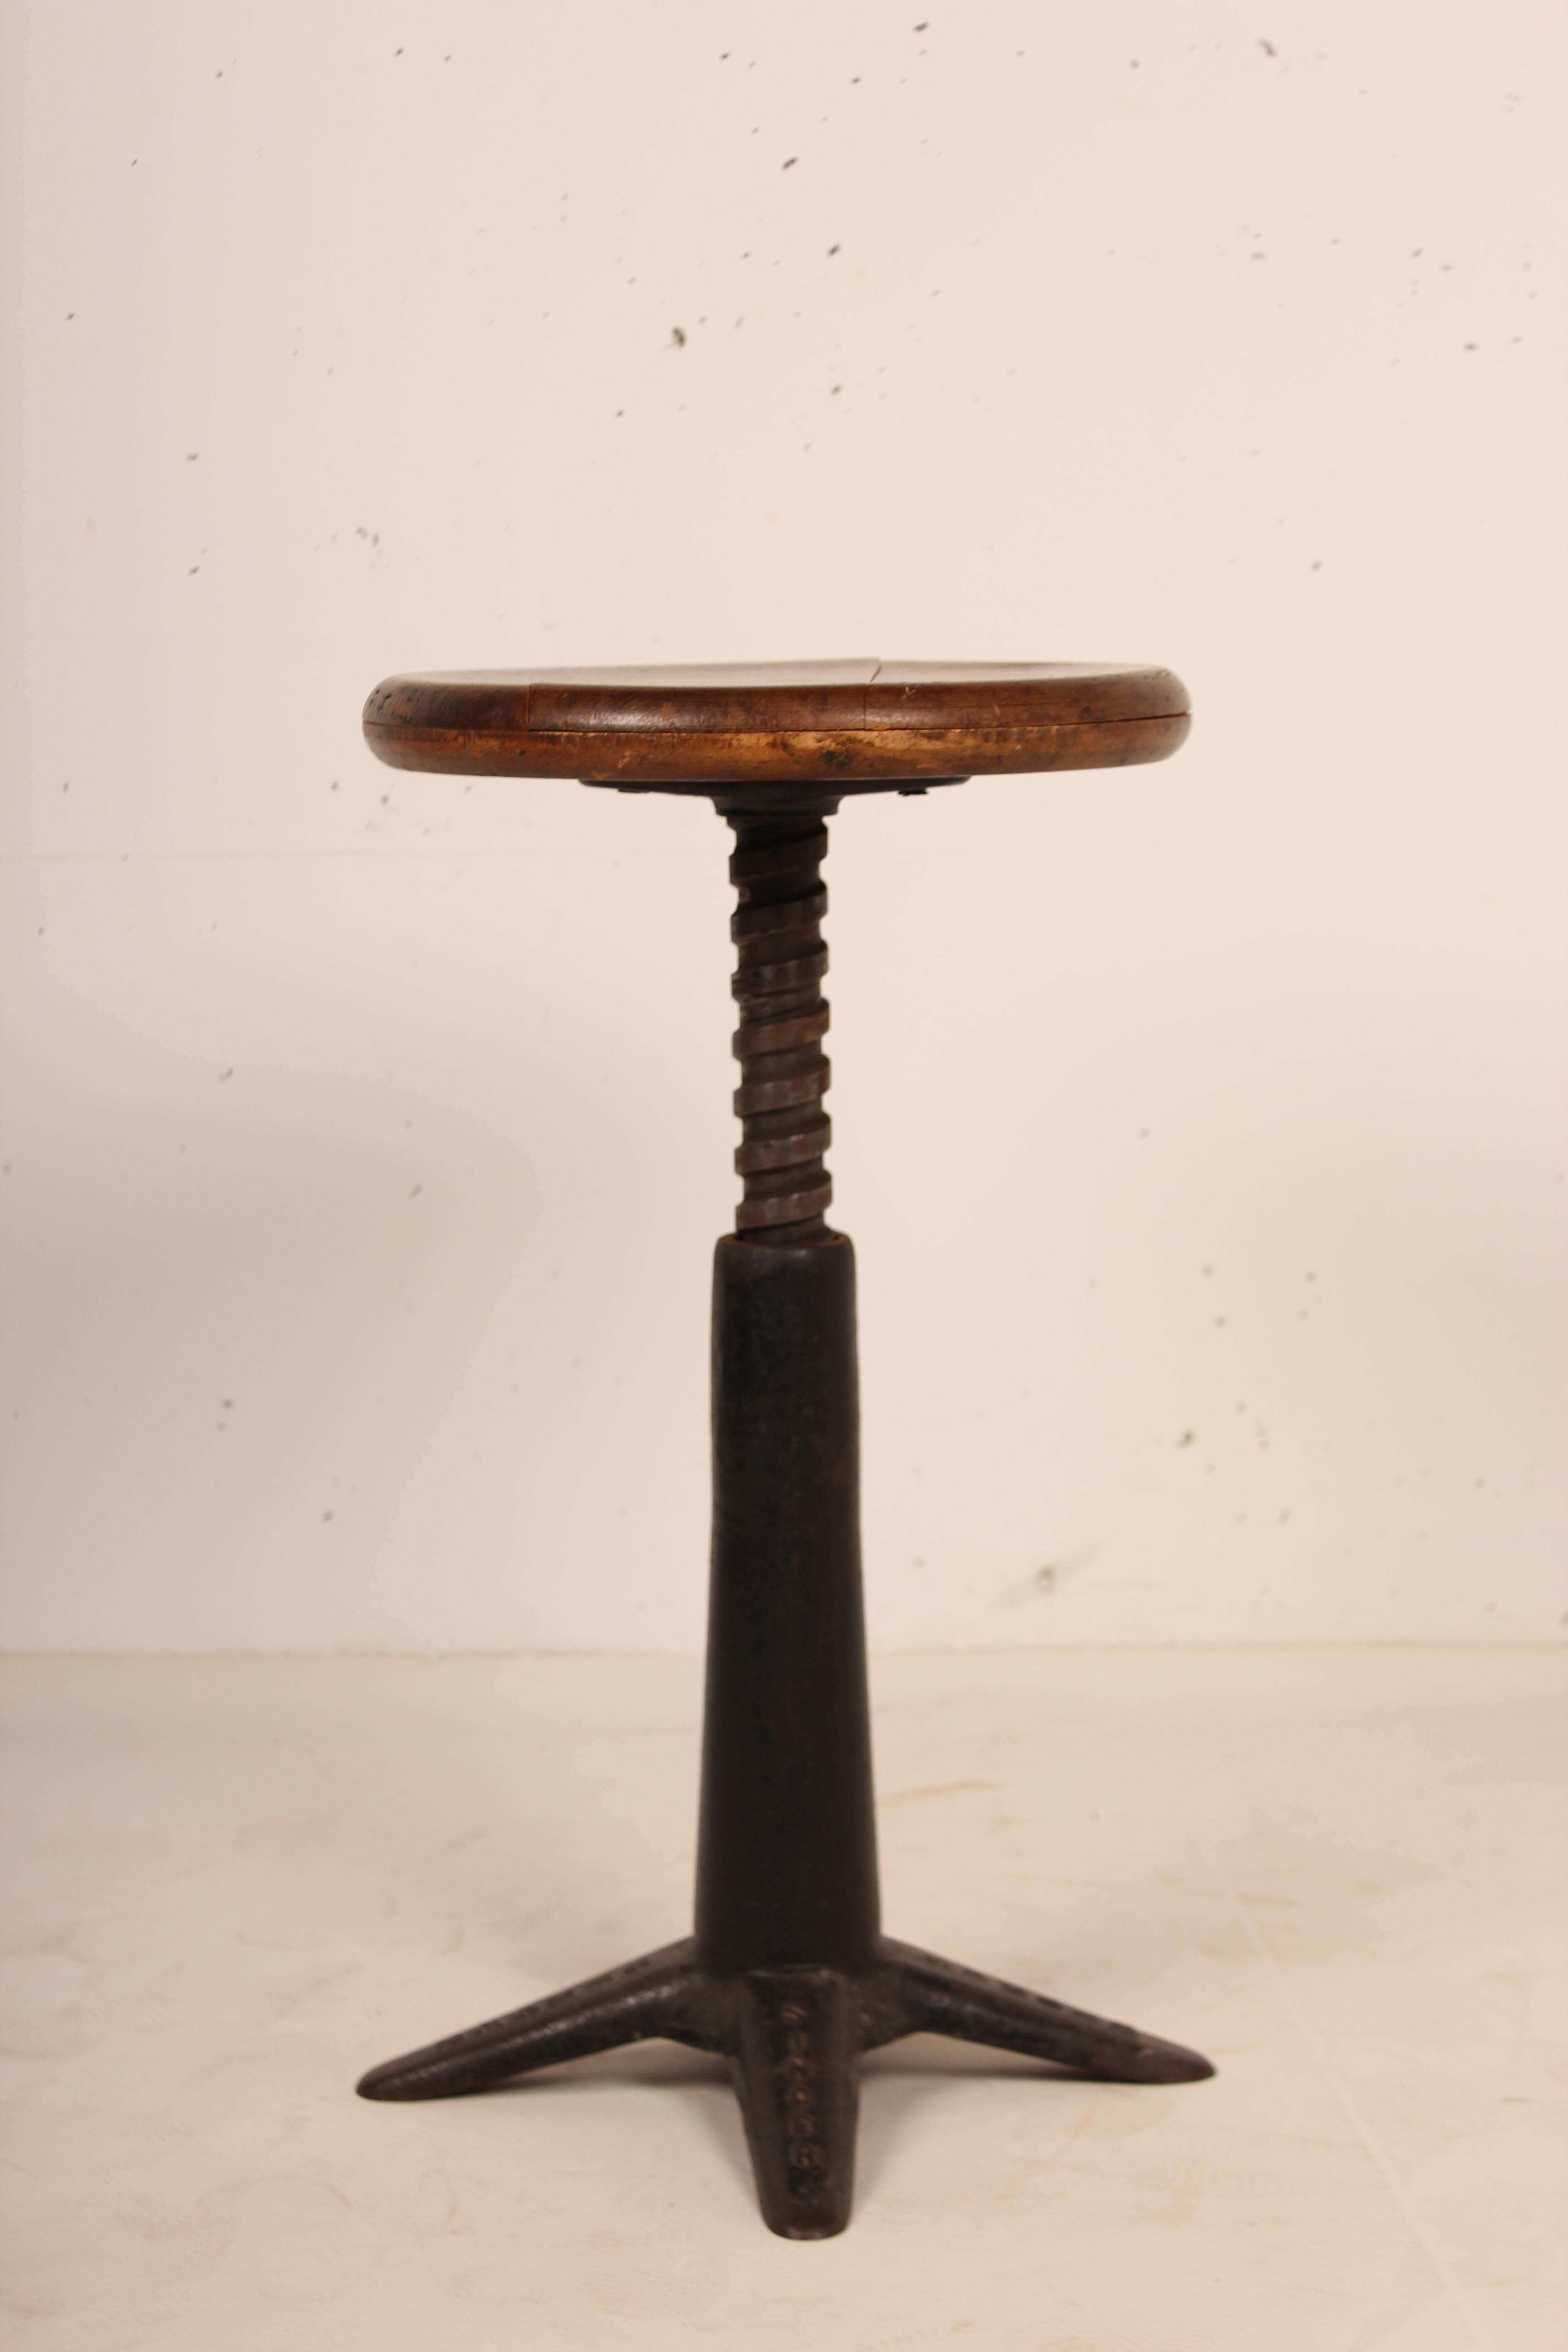 Industrial stool made of cast iron from the Singer Manufacturing company
Height of the seat is adjustable and locked with a butterfly screw.